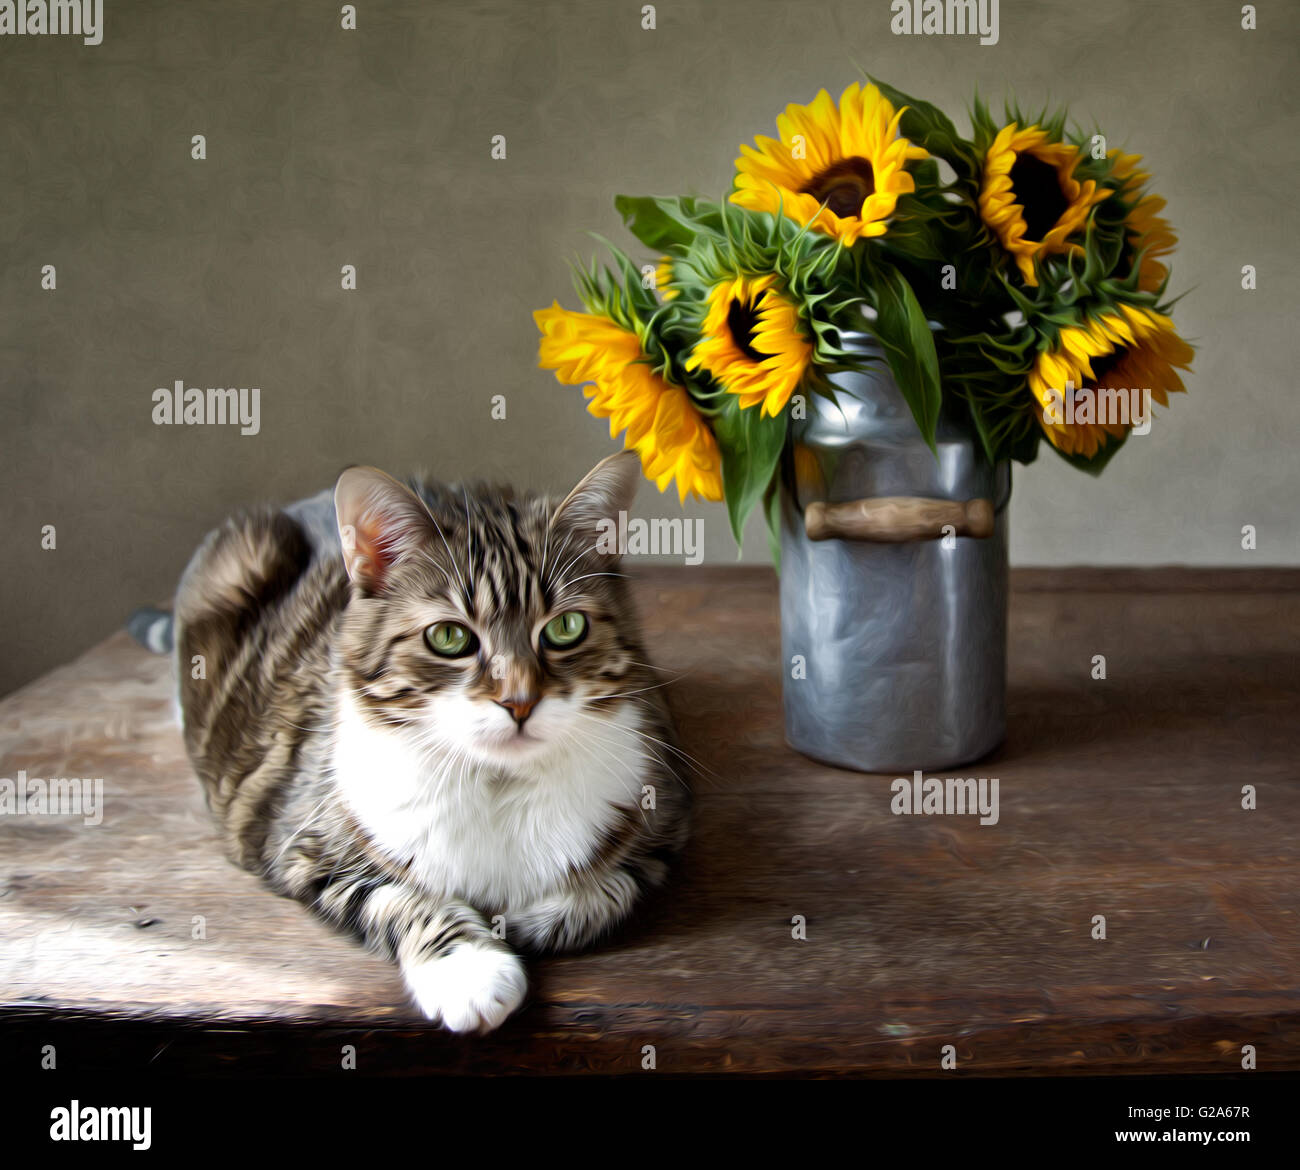 Still-Life illustration in oil painting style of cat and sunflowers Stock Photo